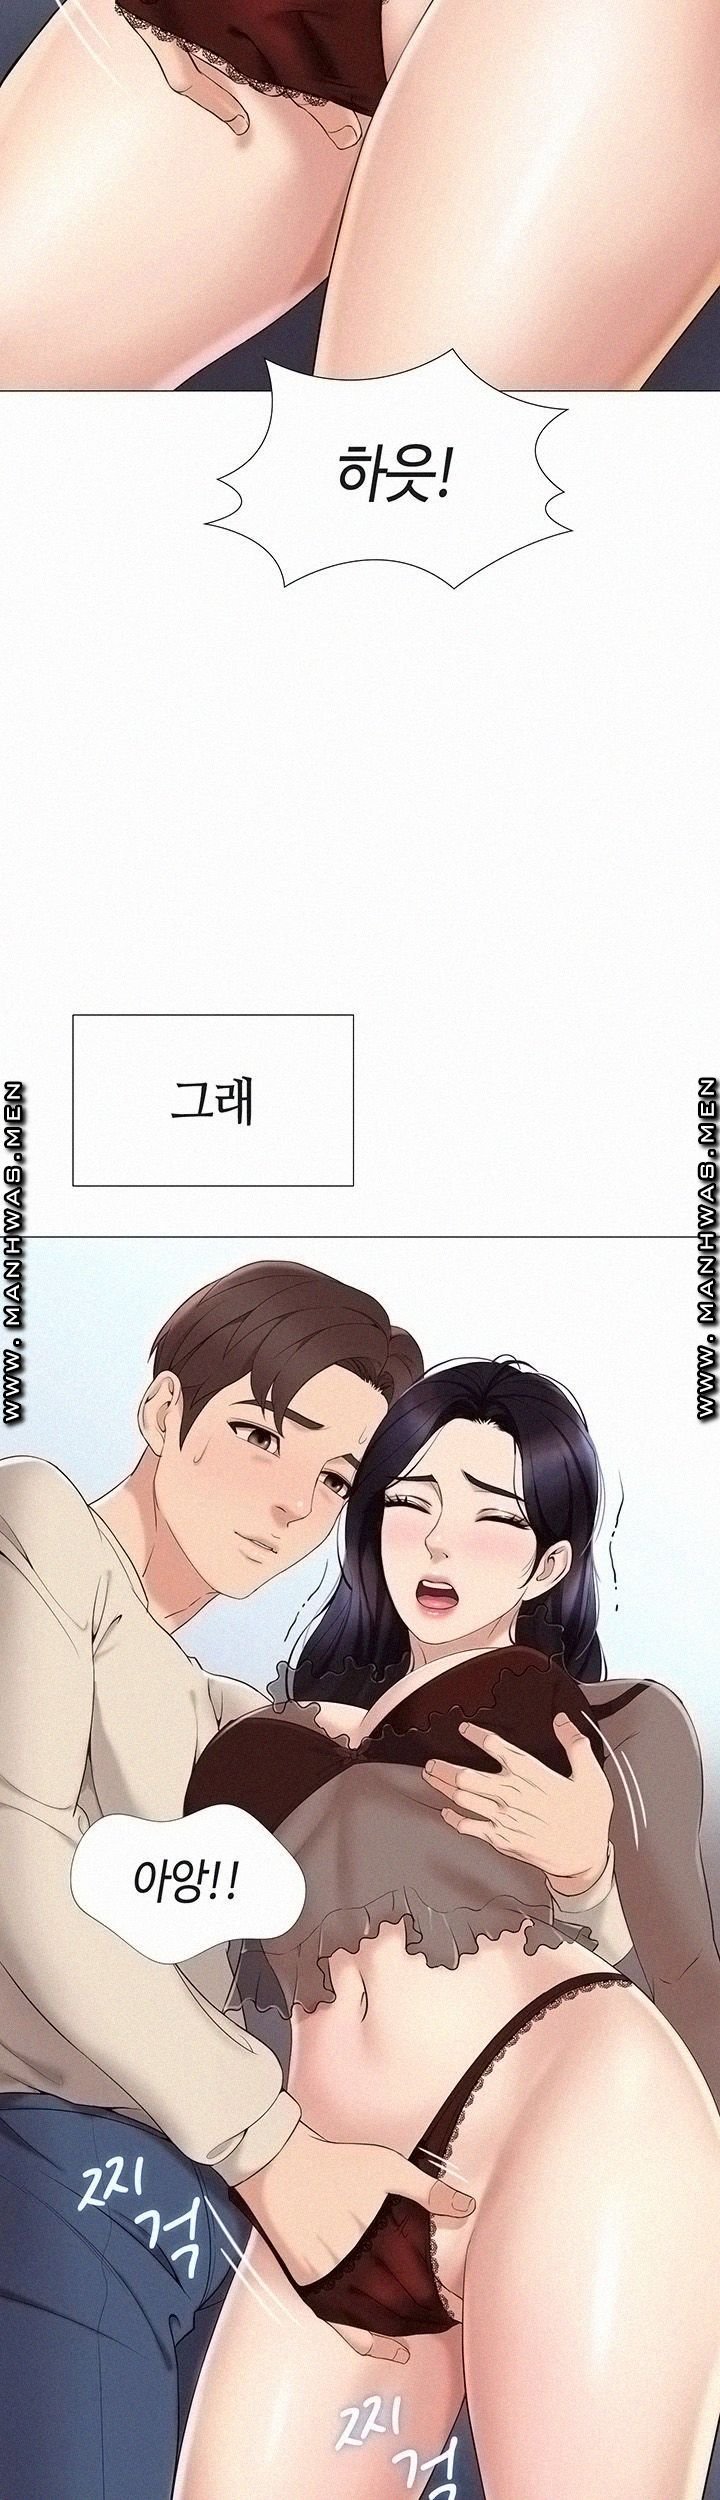 daughter-friend-raw-chap-3-33